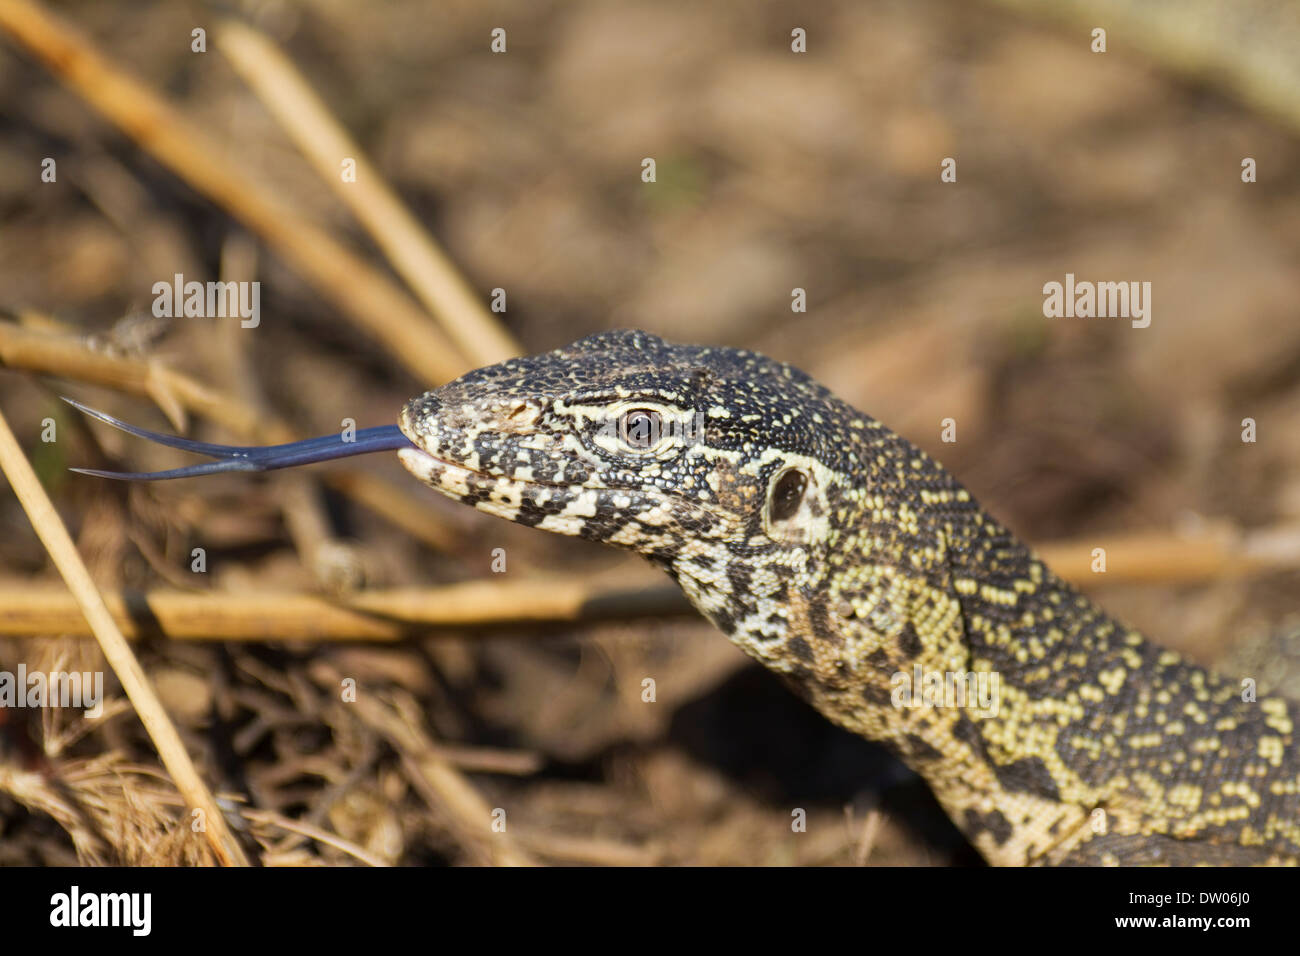 Nile Monitor (Varanus niloticus), showing its forked tongue, Kruger National Park, South Africa Stock Photo